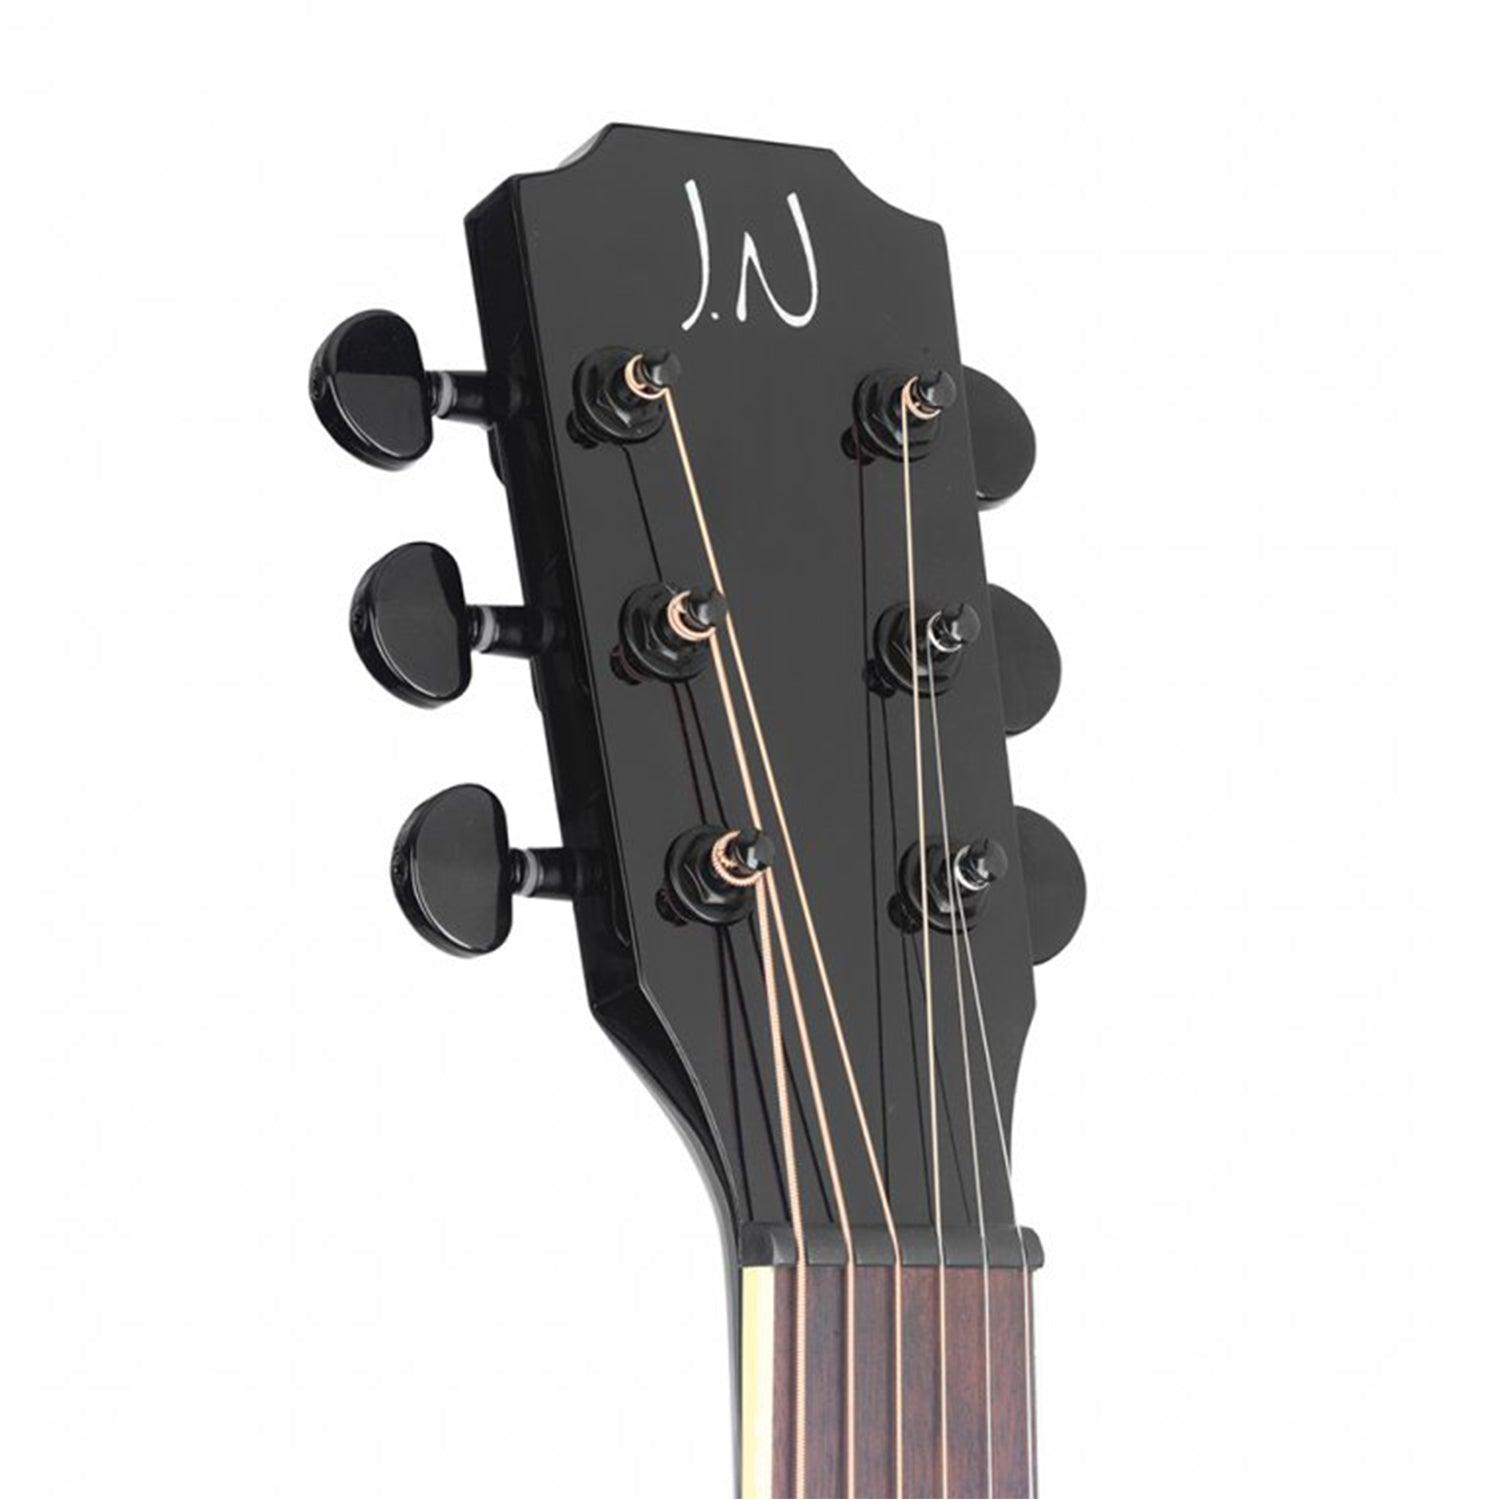 J.N.Guitars YAK-A Acoustic Auditorium Guitar with Solid Mahogany Top, Yakisugi series - DY Pro Audio